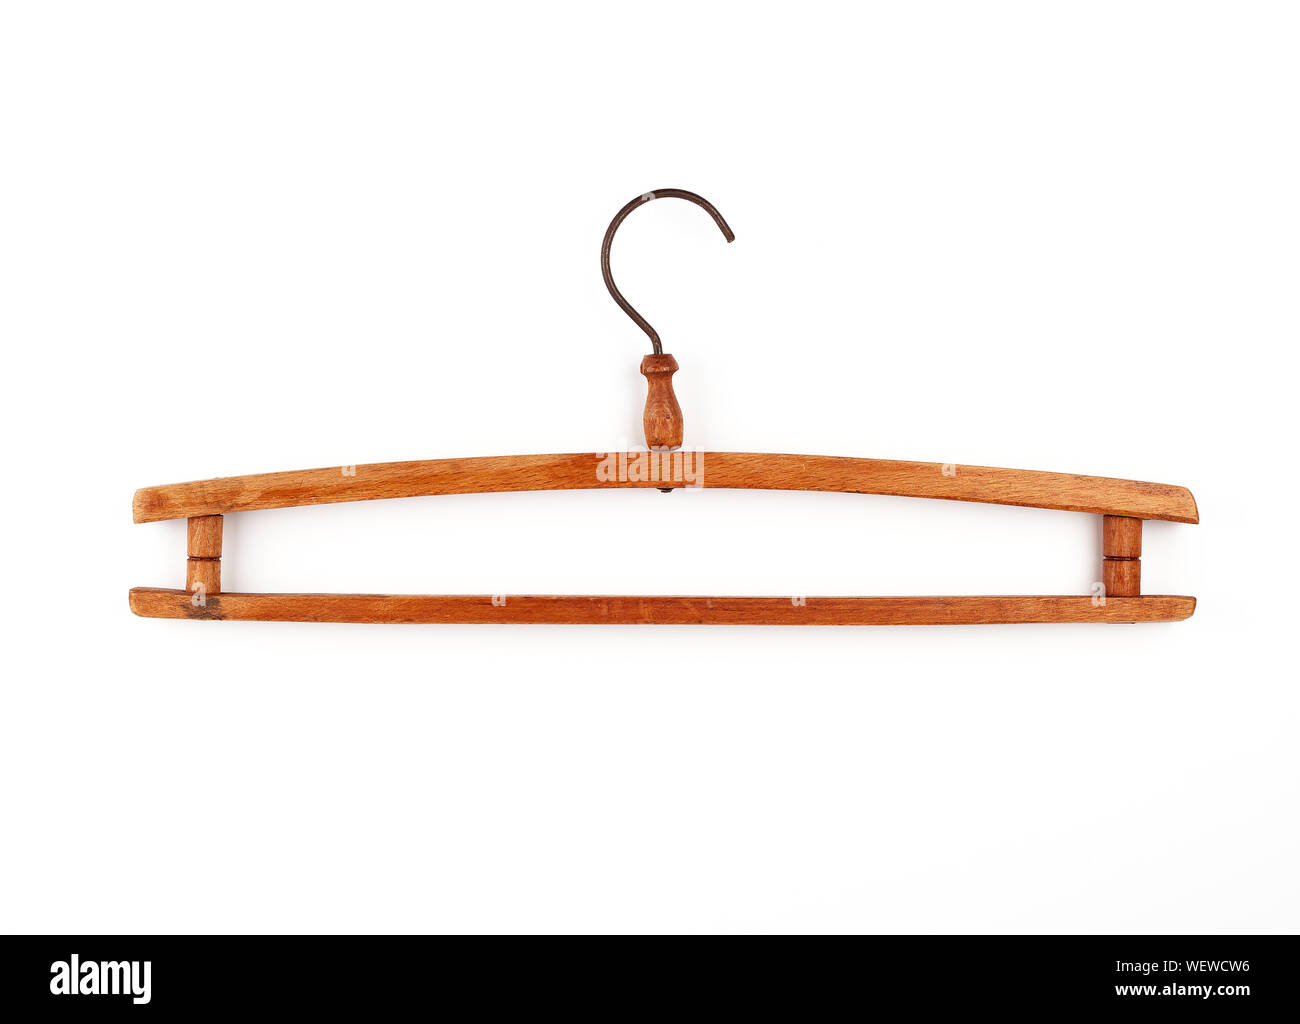 wooden vintage clothes hanger on a white background, iron hook Stock Photo